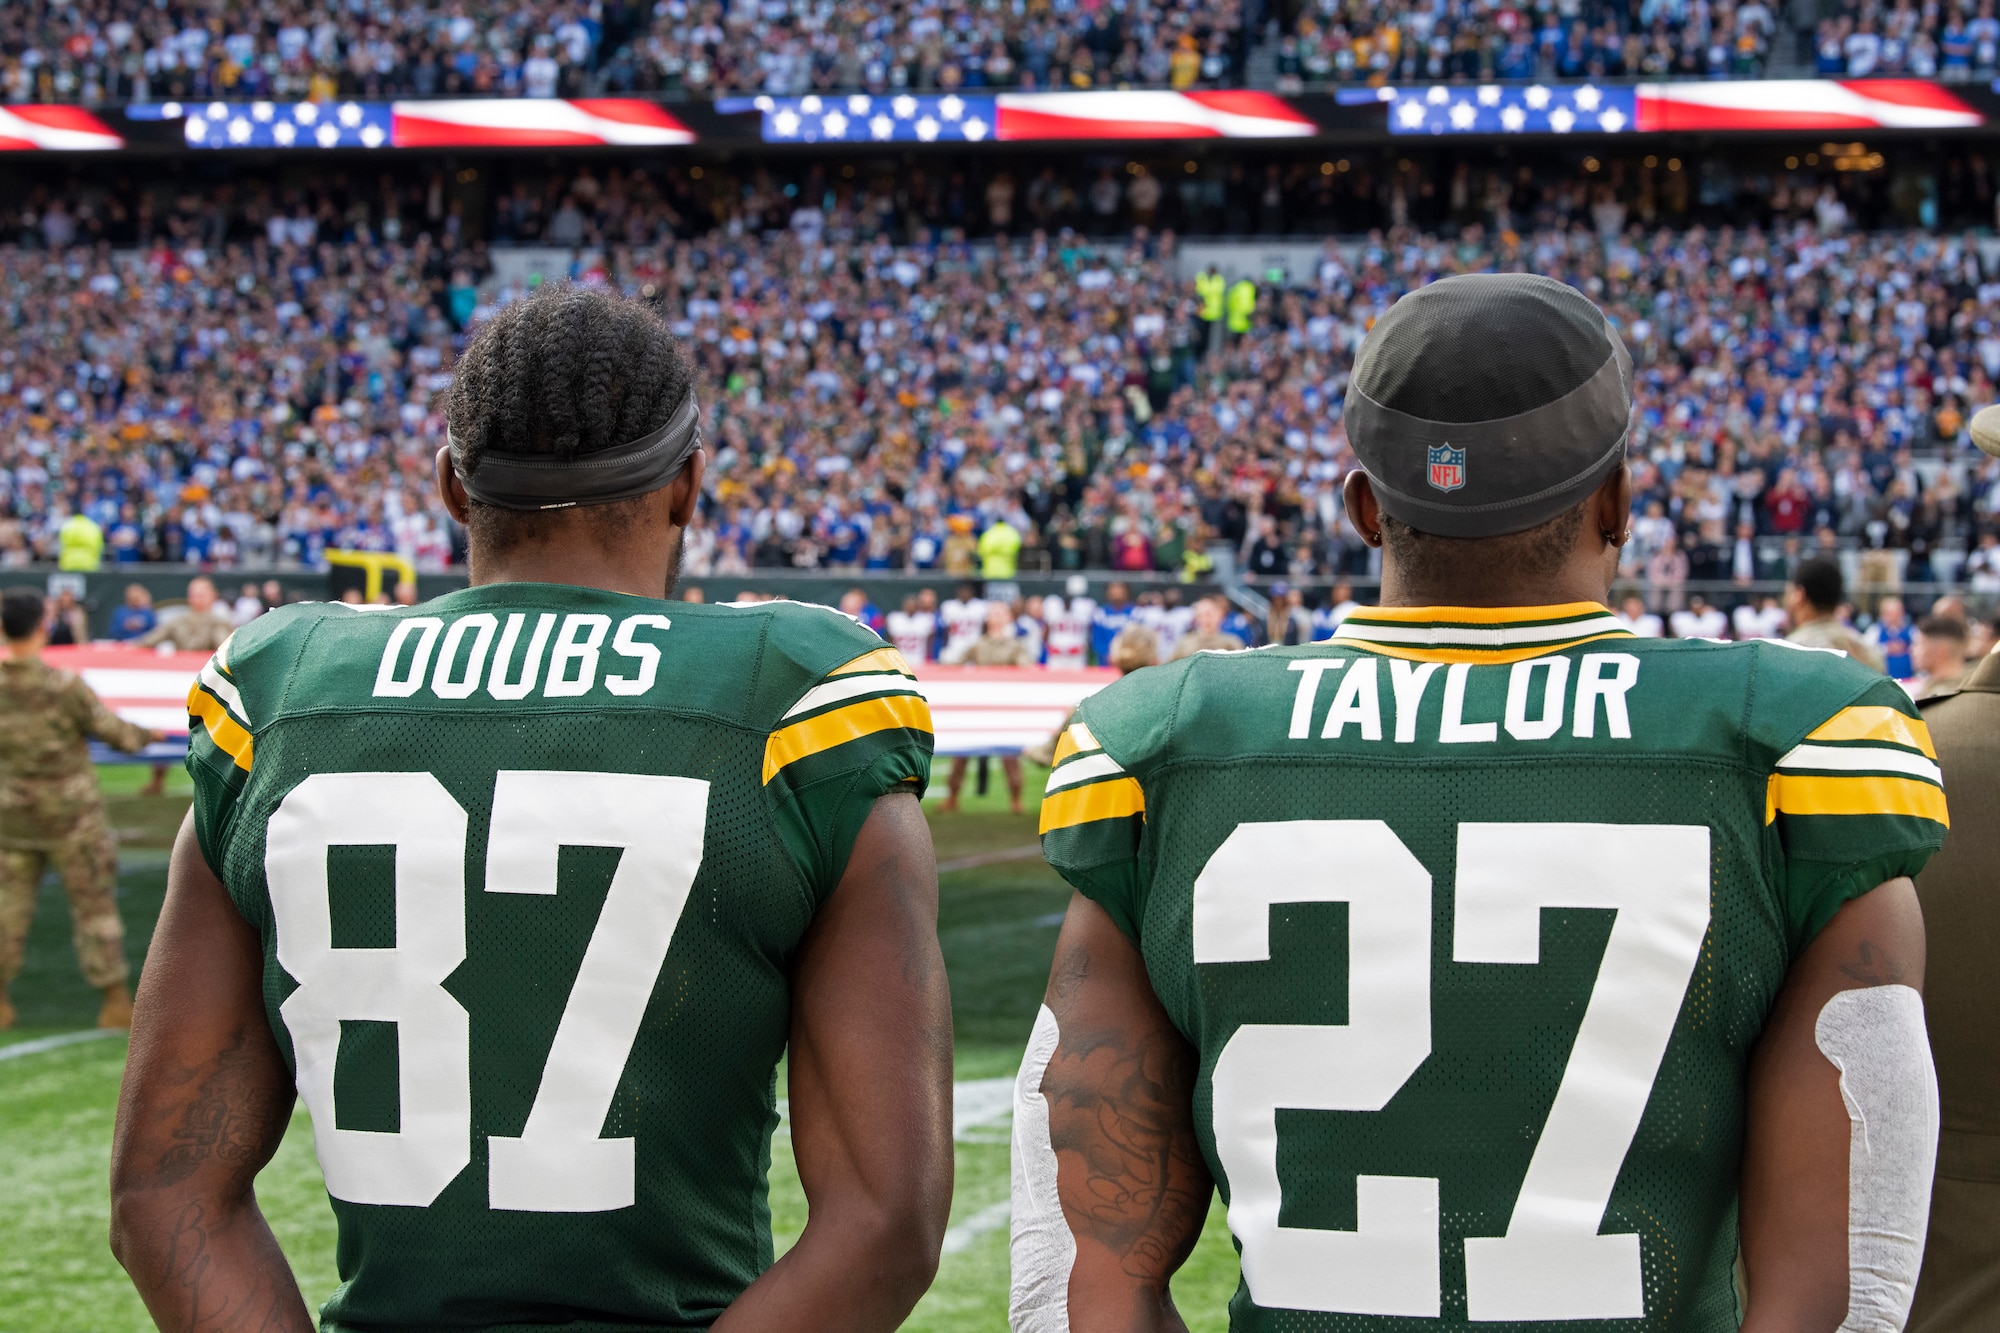 Romeo Doubs, Green Bay Packers wide receiver, and Patrick Taylor, Packers running back, stand on the sideline during the U.S. National Anthem of the National Football League’s New York Giants vs. Green Bay Packers game at Tottenham Hotspur Stadium, in London, England, Oct. 9, 2022. The pre-game ceremony featured more than 50 Airmen unfurling the flag along with an honor guard team and vocalist to sing the U.S. National Anthem. (U.S. Air Force photo by Tech. Sgt. Anthony Hetlage)